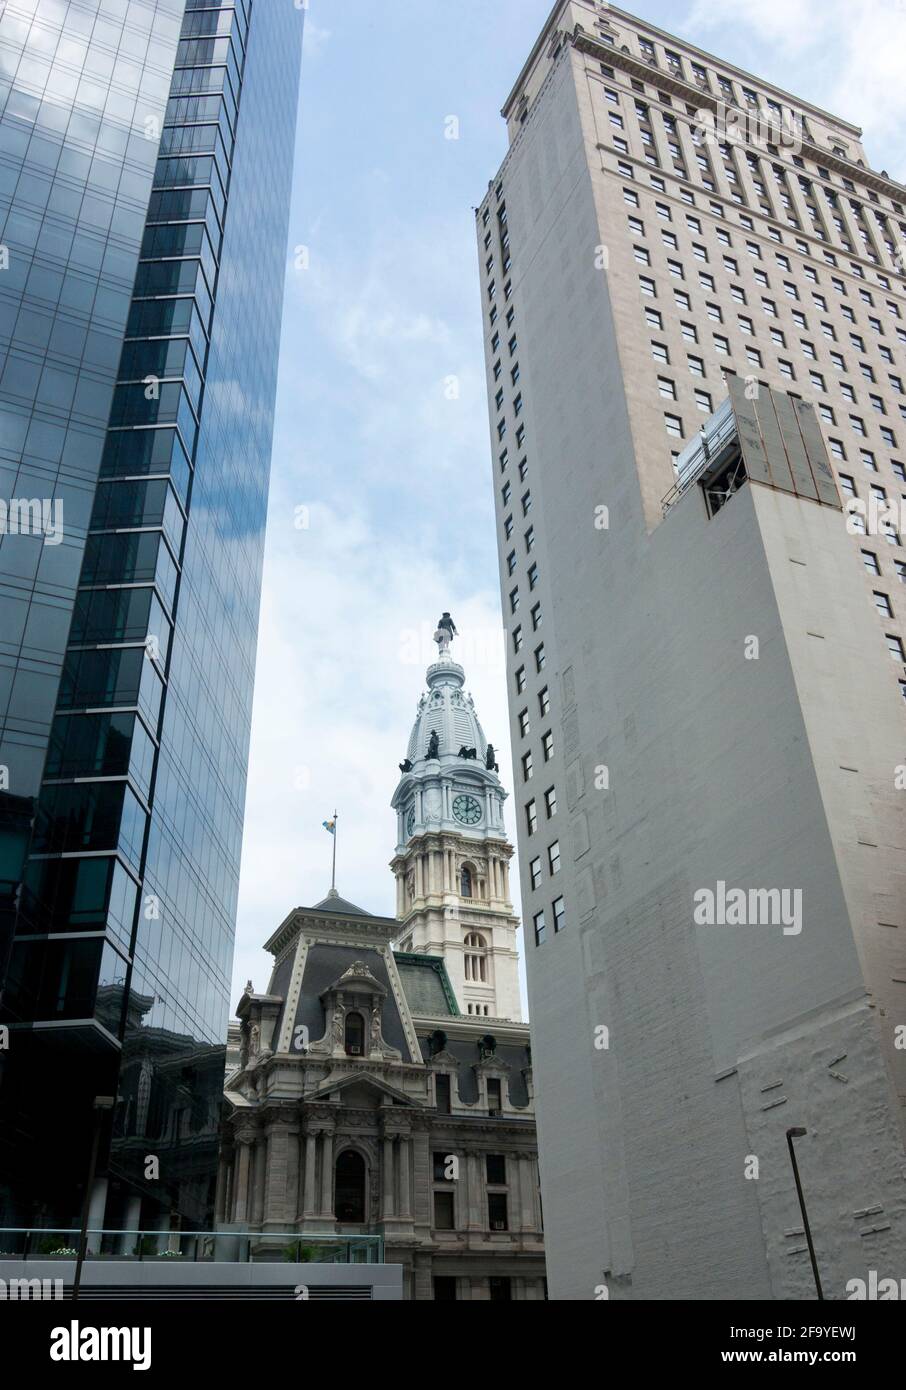 City Hall, Penn Square, Philadelphia, USA. Once the world's tallest building, it is now dwarfed by modern skyscrapers. Stock Photo